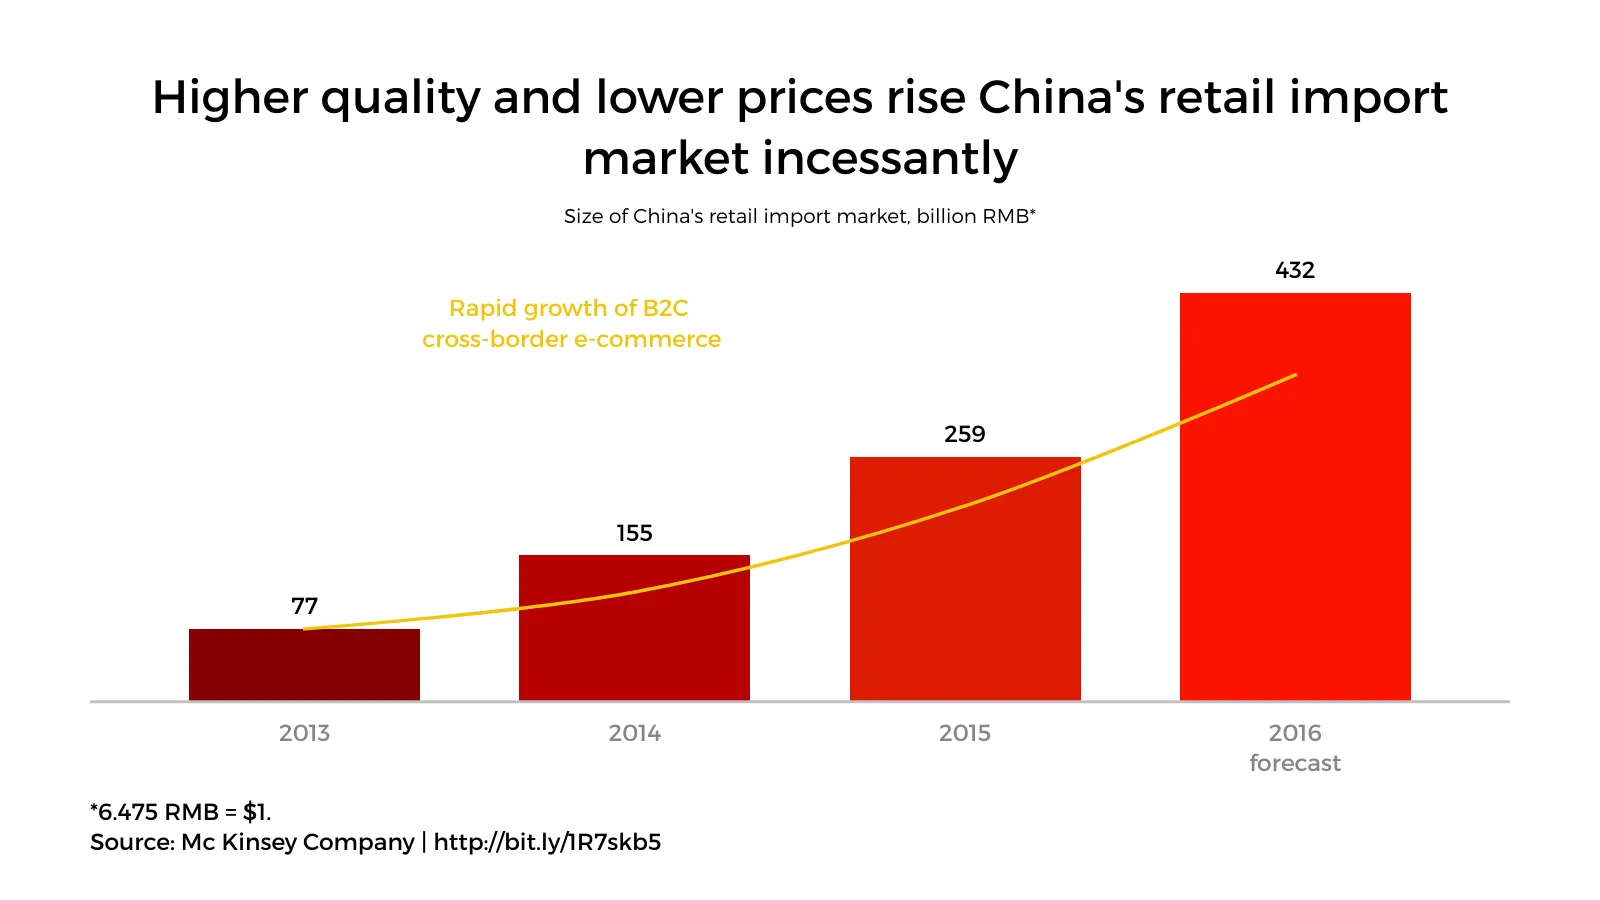 Bar Chart example: Higher quality and lower prices rise China's retail import market incessantly